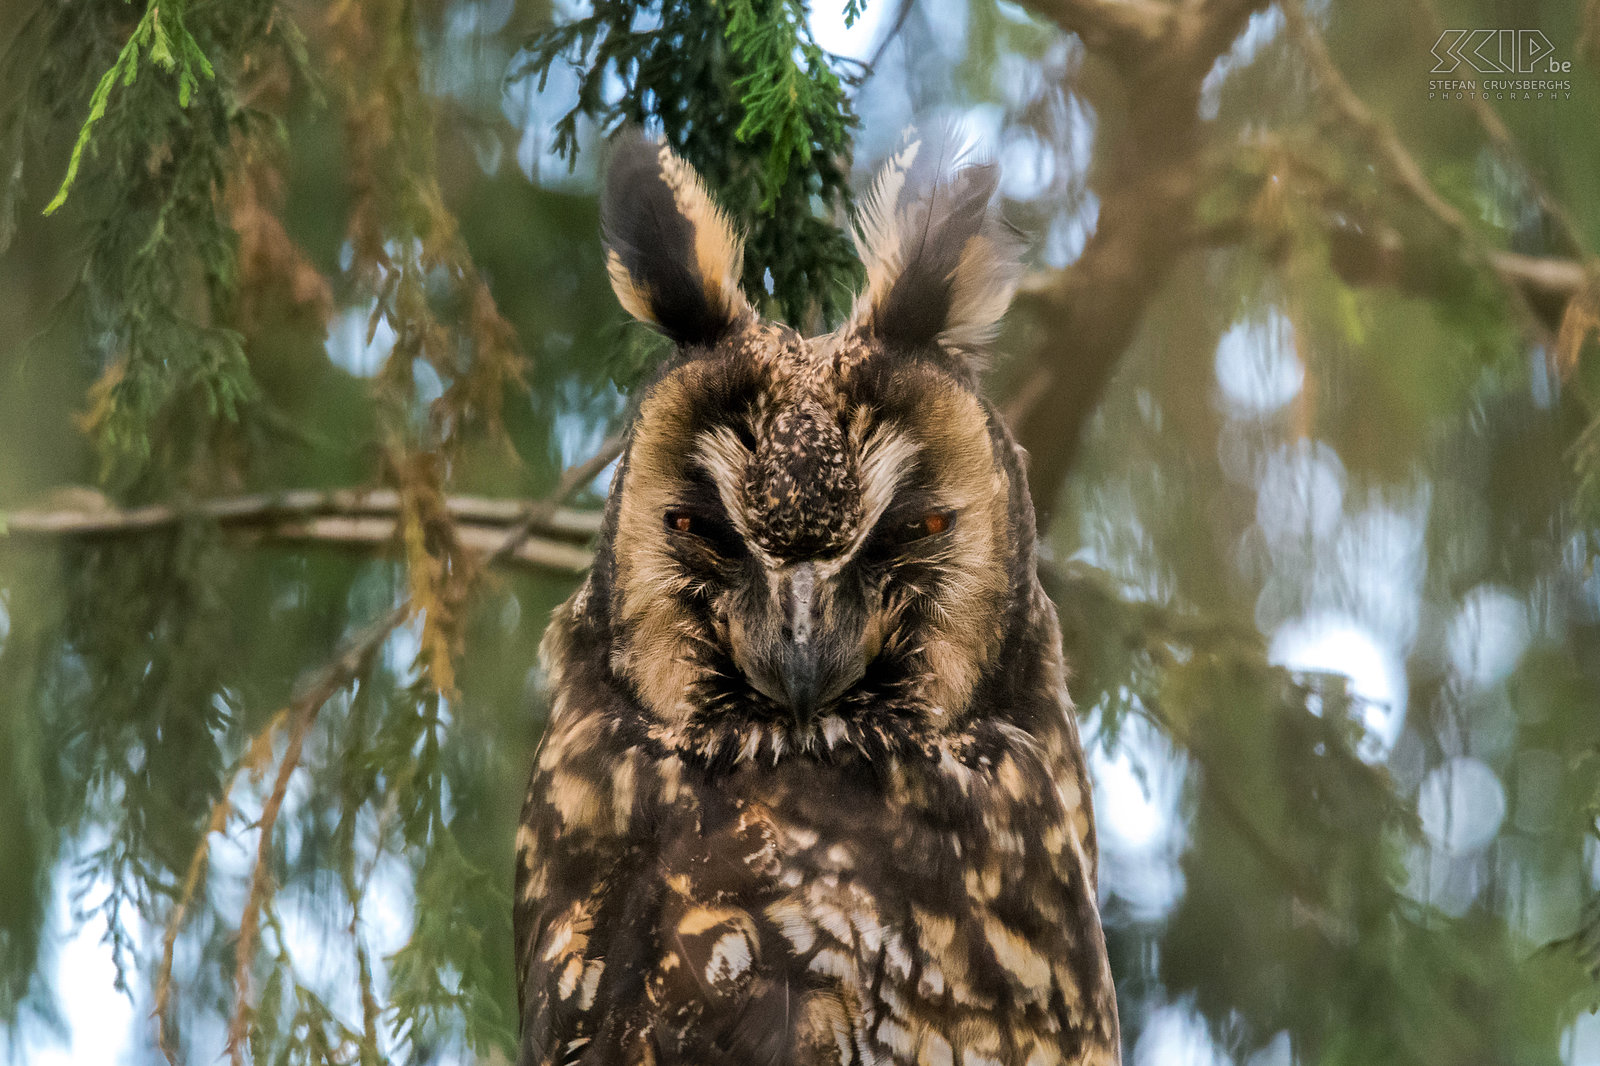 Bale Mountains - Dinsho - Abyssinian owl close-up The Abyssinian owl or African long-eared owl (Asio abyssinicus abyssinicus) is a medium-sized nocturnal owl that lives in the highlands (up to 3900 meters) in Ethiopia and northern Kenya. Stefan Cruysberghs